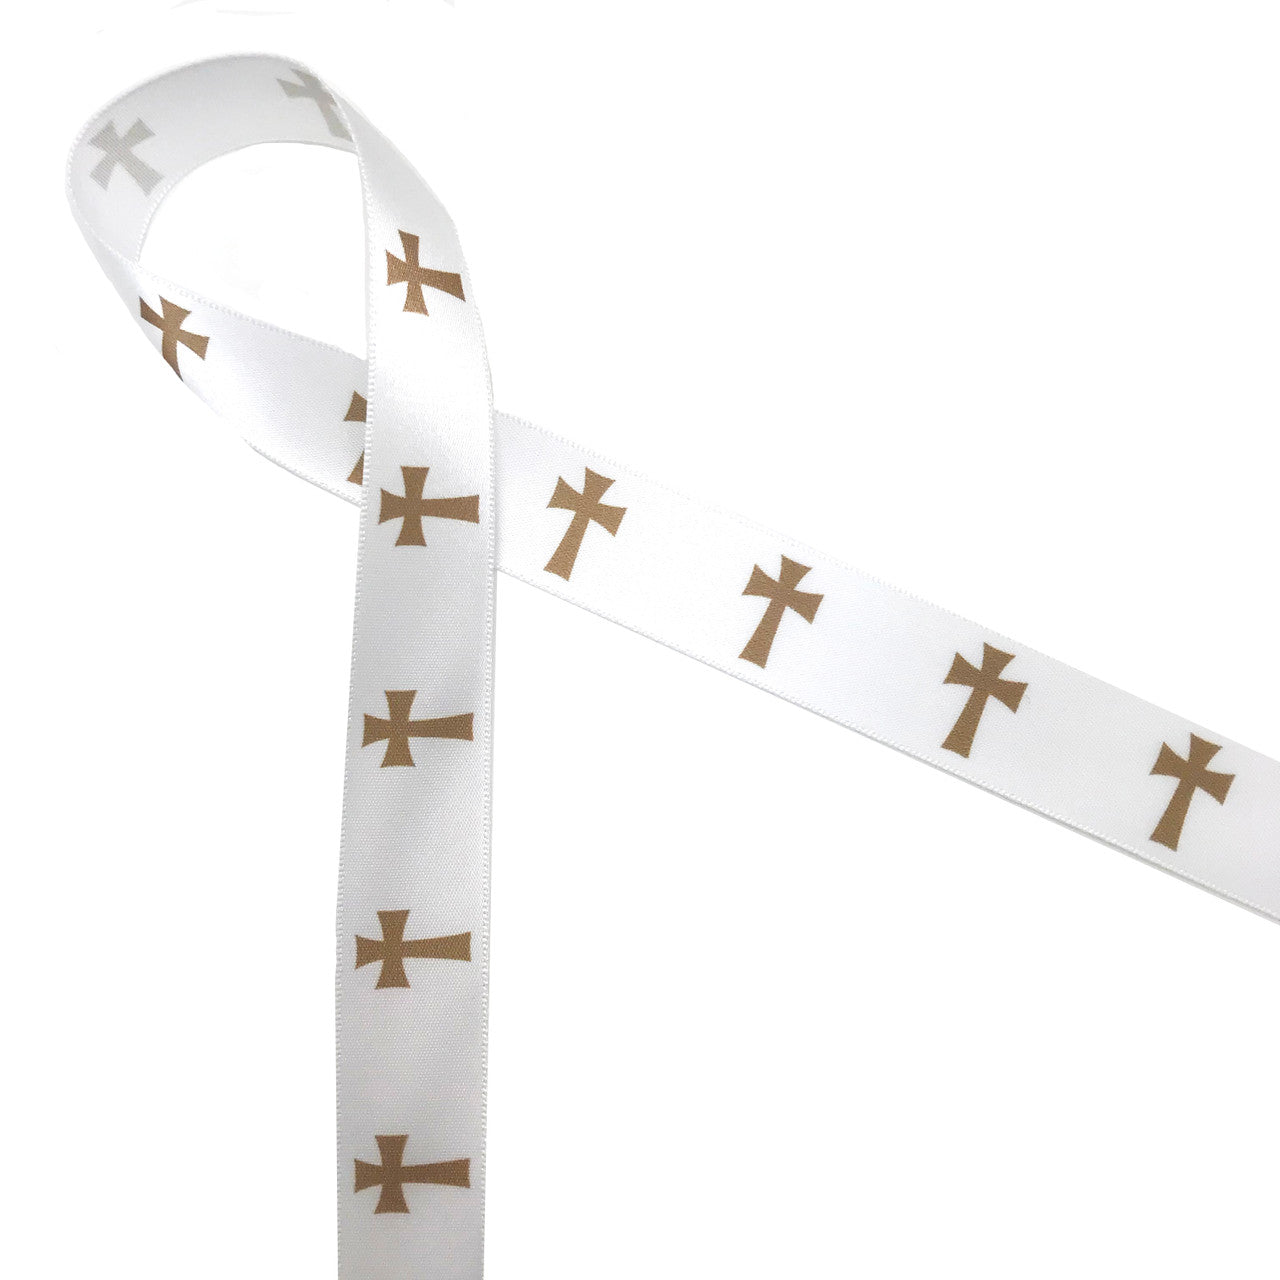 Gold crosses are traditional symbol of Christianity. Gold crosses in a row printed on 7/8" white single face satin is the ideal ribbon for Christian celebrations, sacraments and ceremonies. This is an ideal ribbon for Easter celebrations, First Communion, Confirmation, Weddings and Funerals. Use this ribbon for gift wrap, gift baskets, ceremony decor, ribbon crafts, wreath making, sewing and quilting. All our ribbon  is designed and printed in the USA.